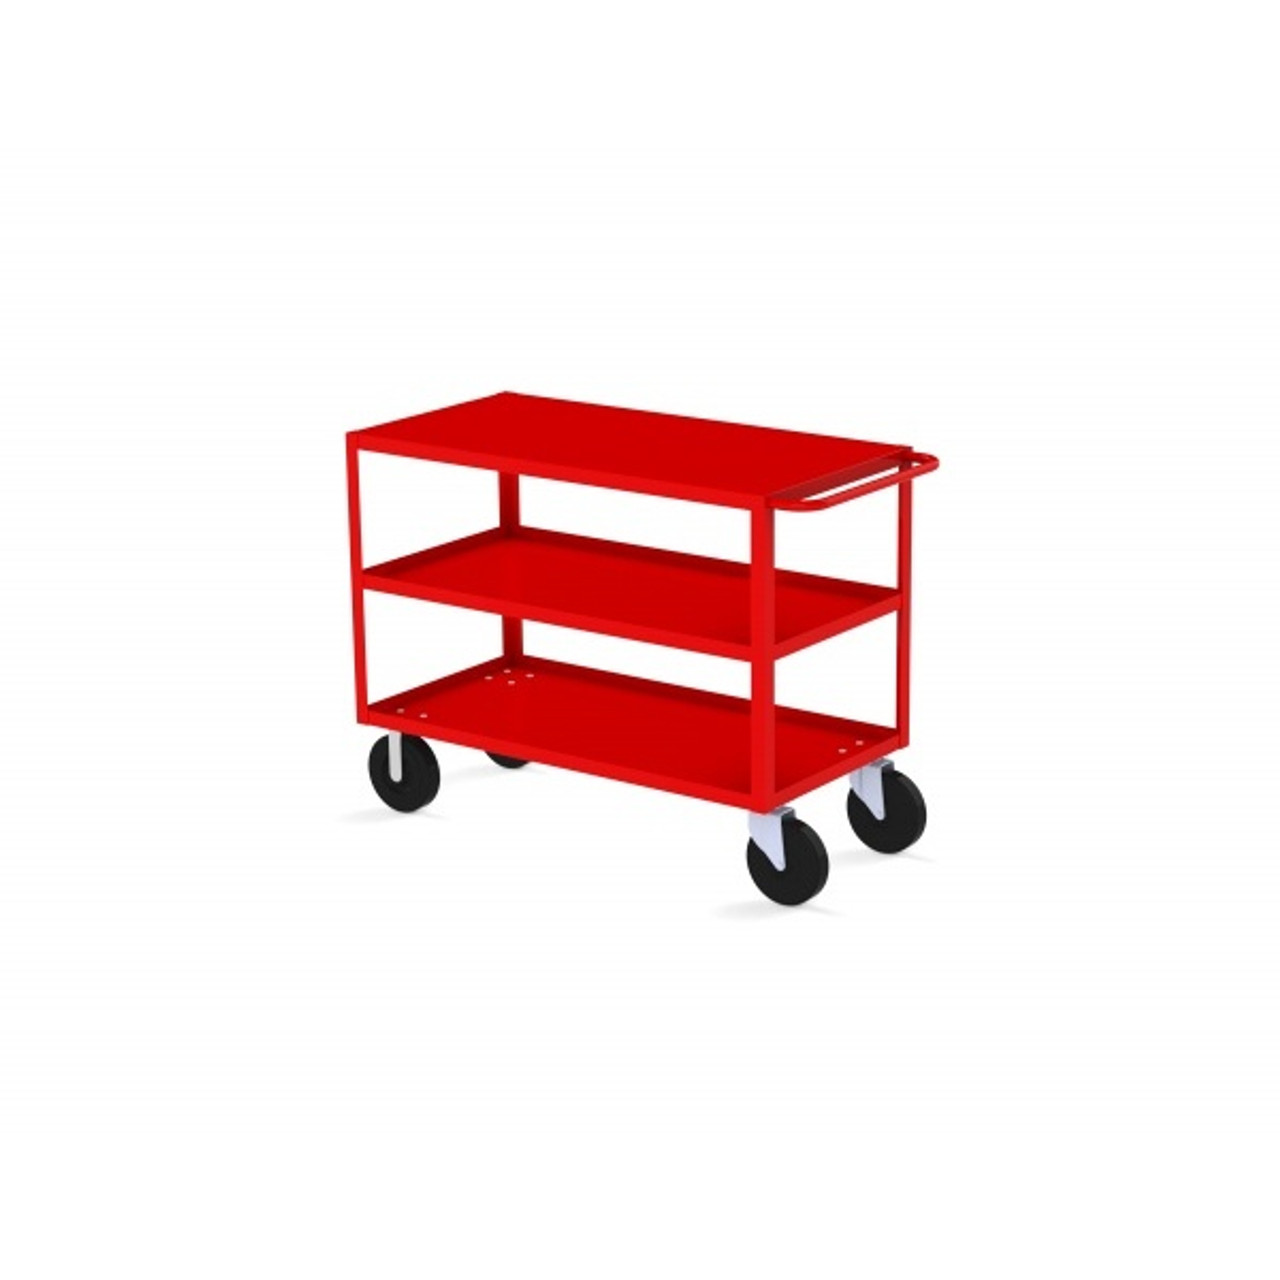 Valley Craft Three Shelf 30 x 60" Flush-Top Utility Cart, Red with Mold On Casters(CALL FOR BEST PRICING)